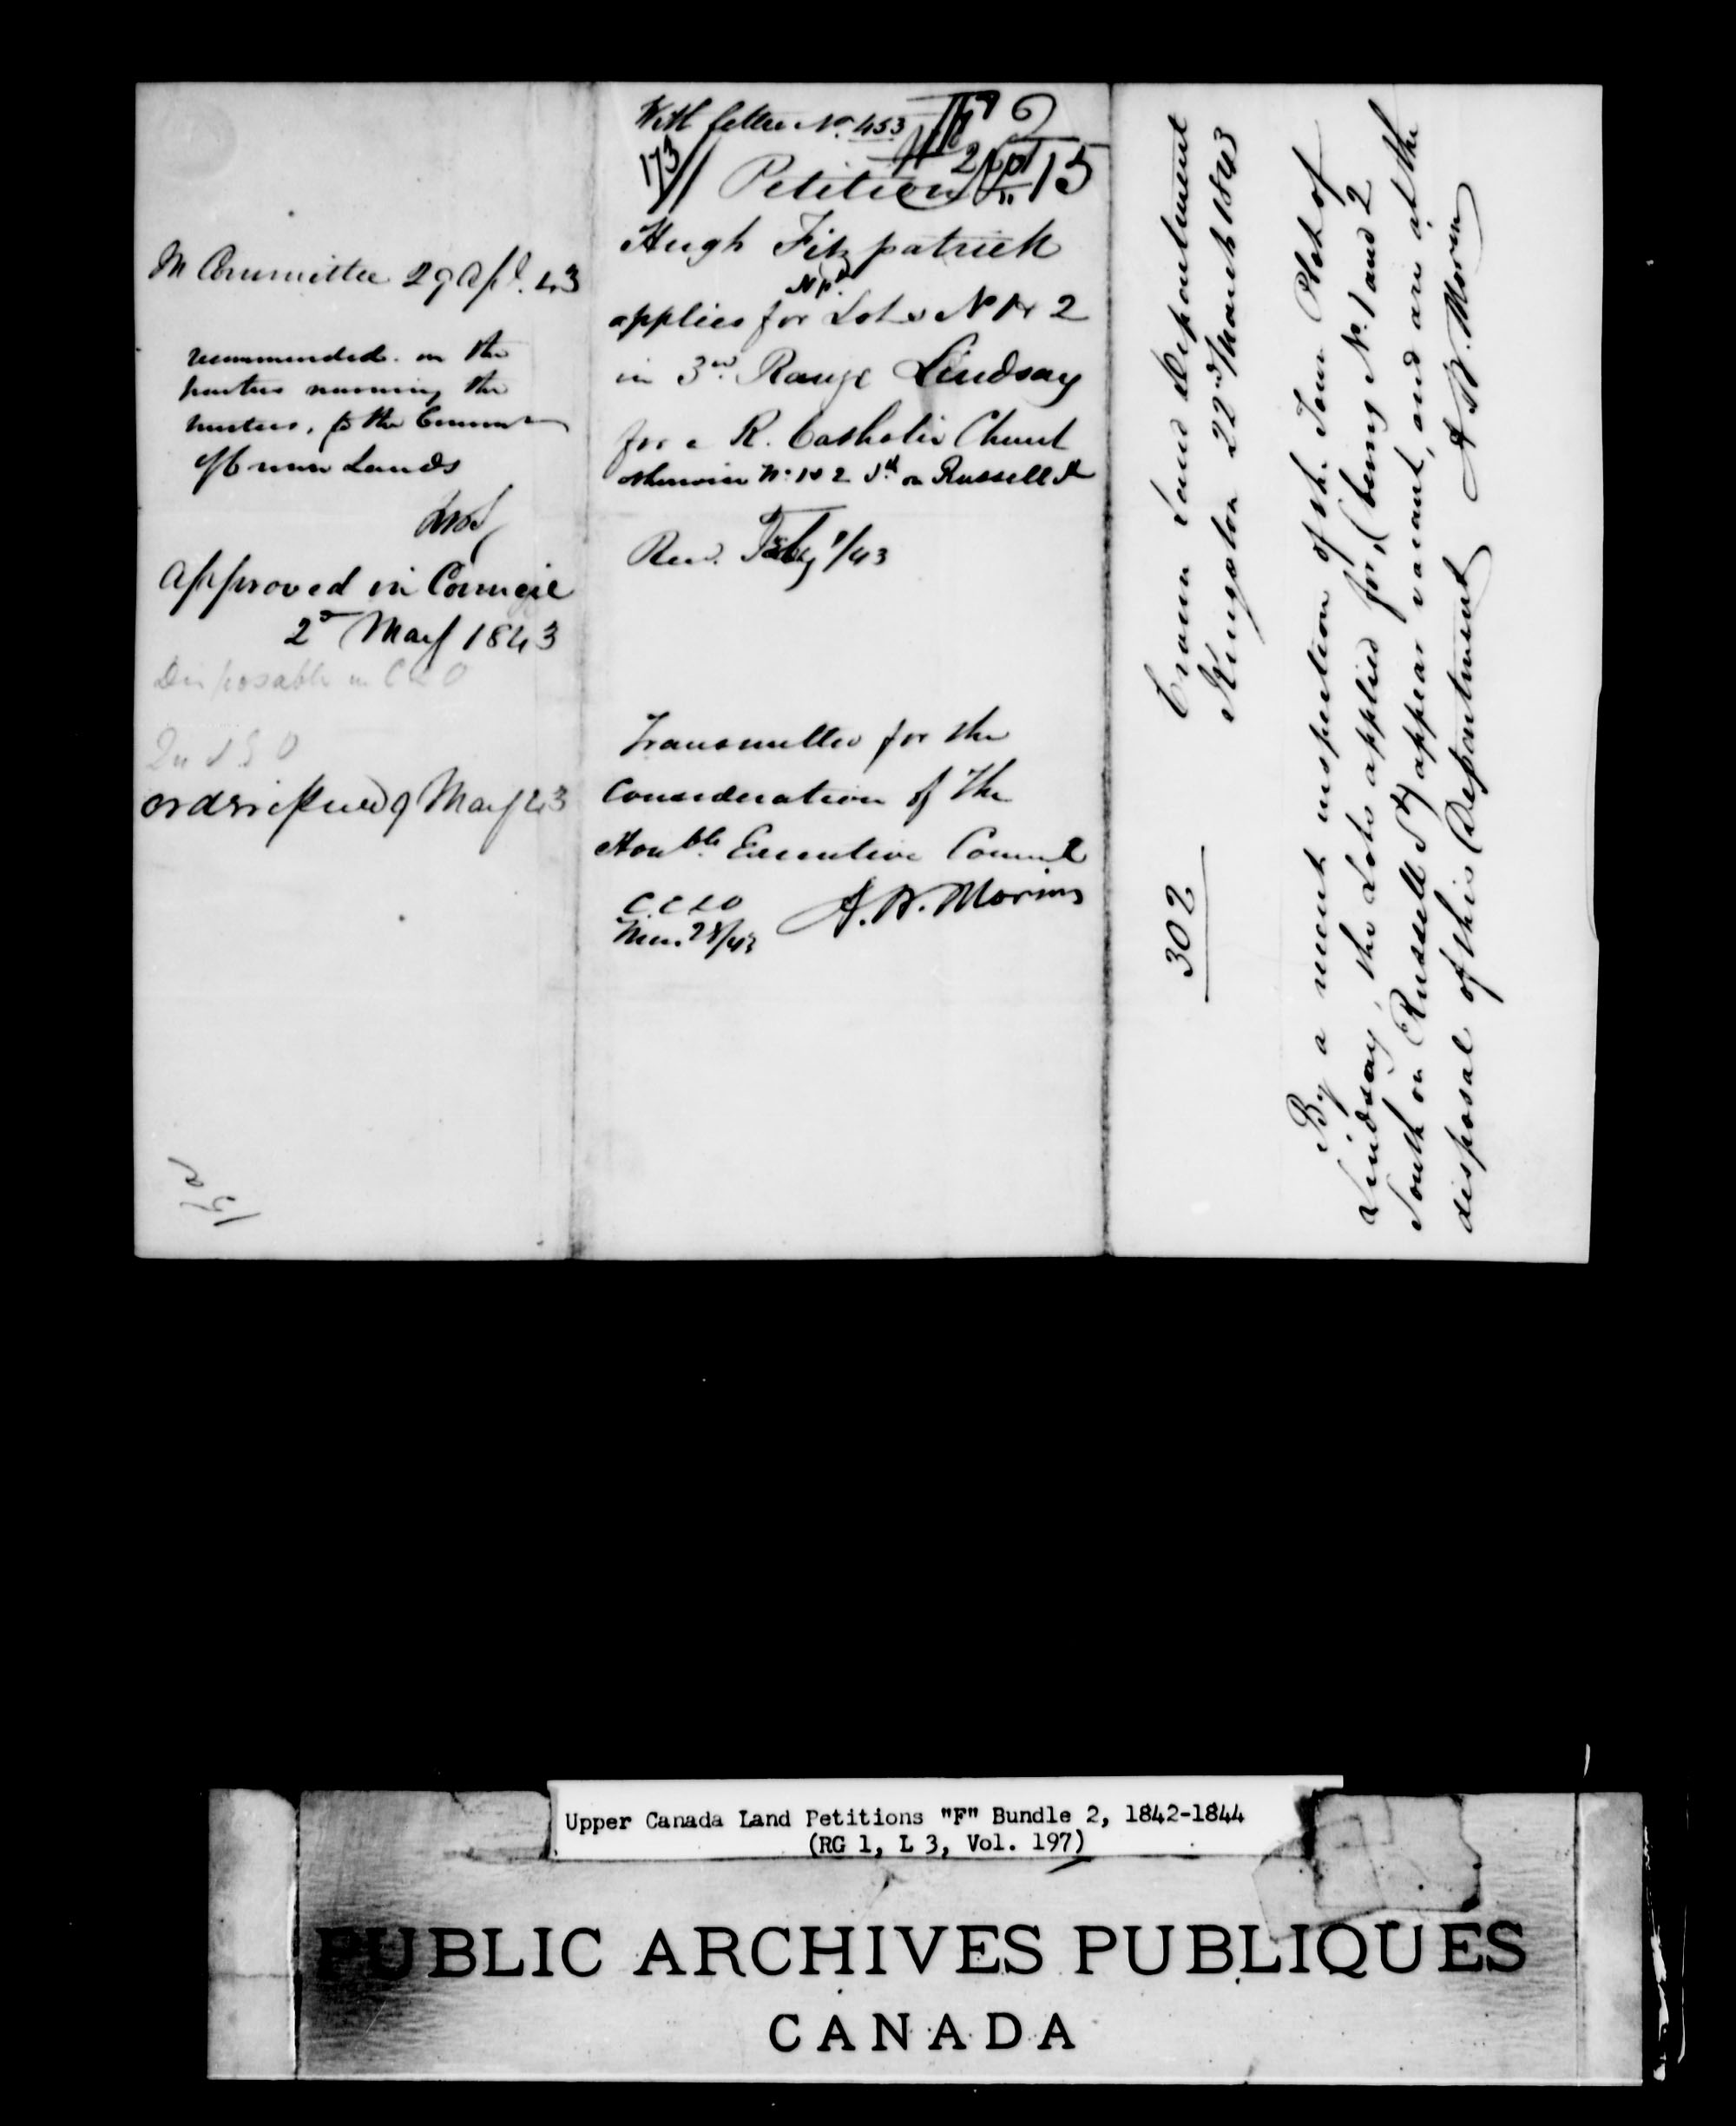 Title: Upper Canada Land Petitions (1763-1865) - Mikan Number: 205131 - Microform: c-2023